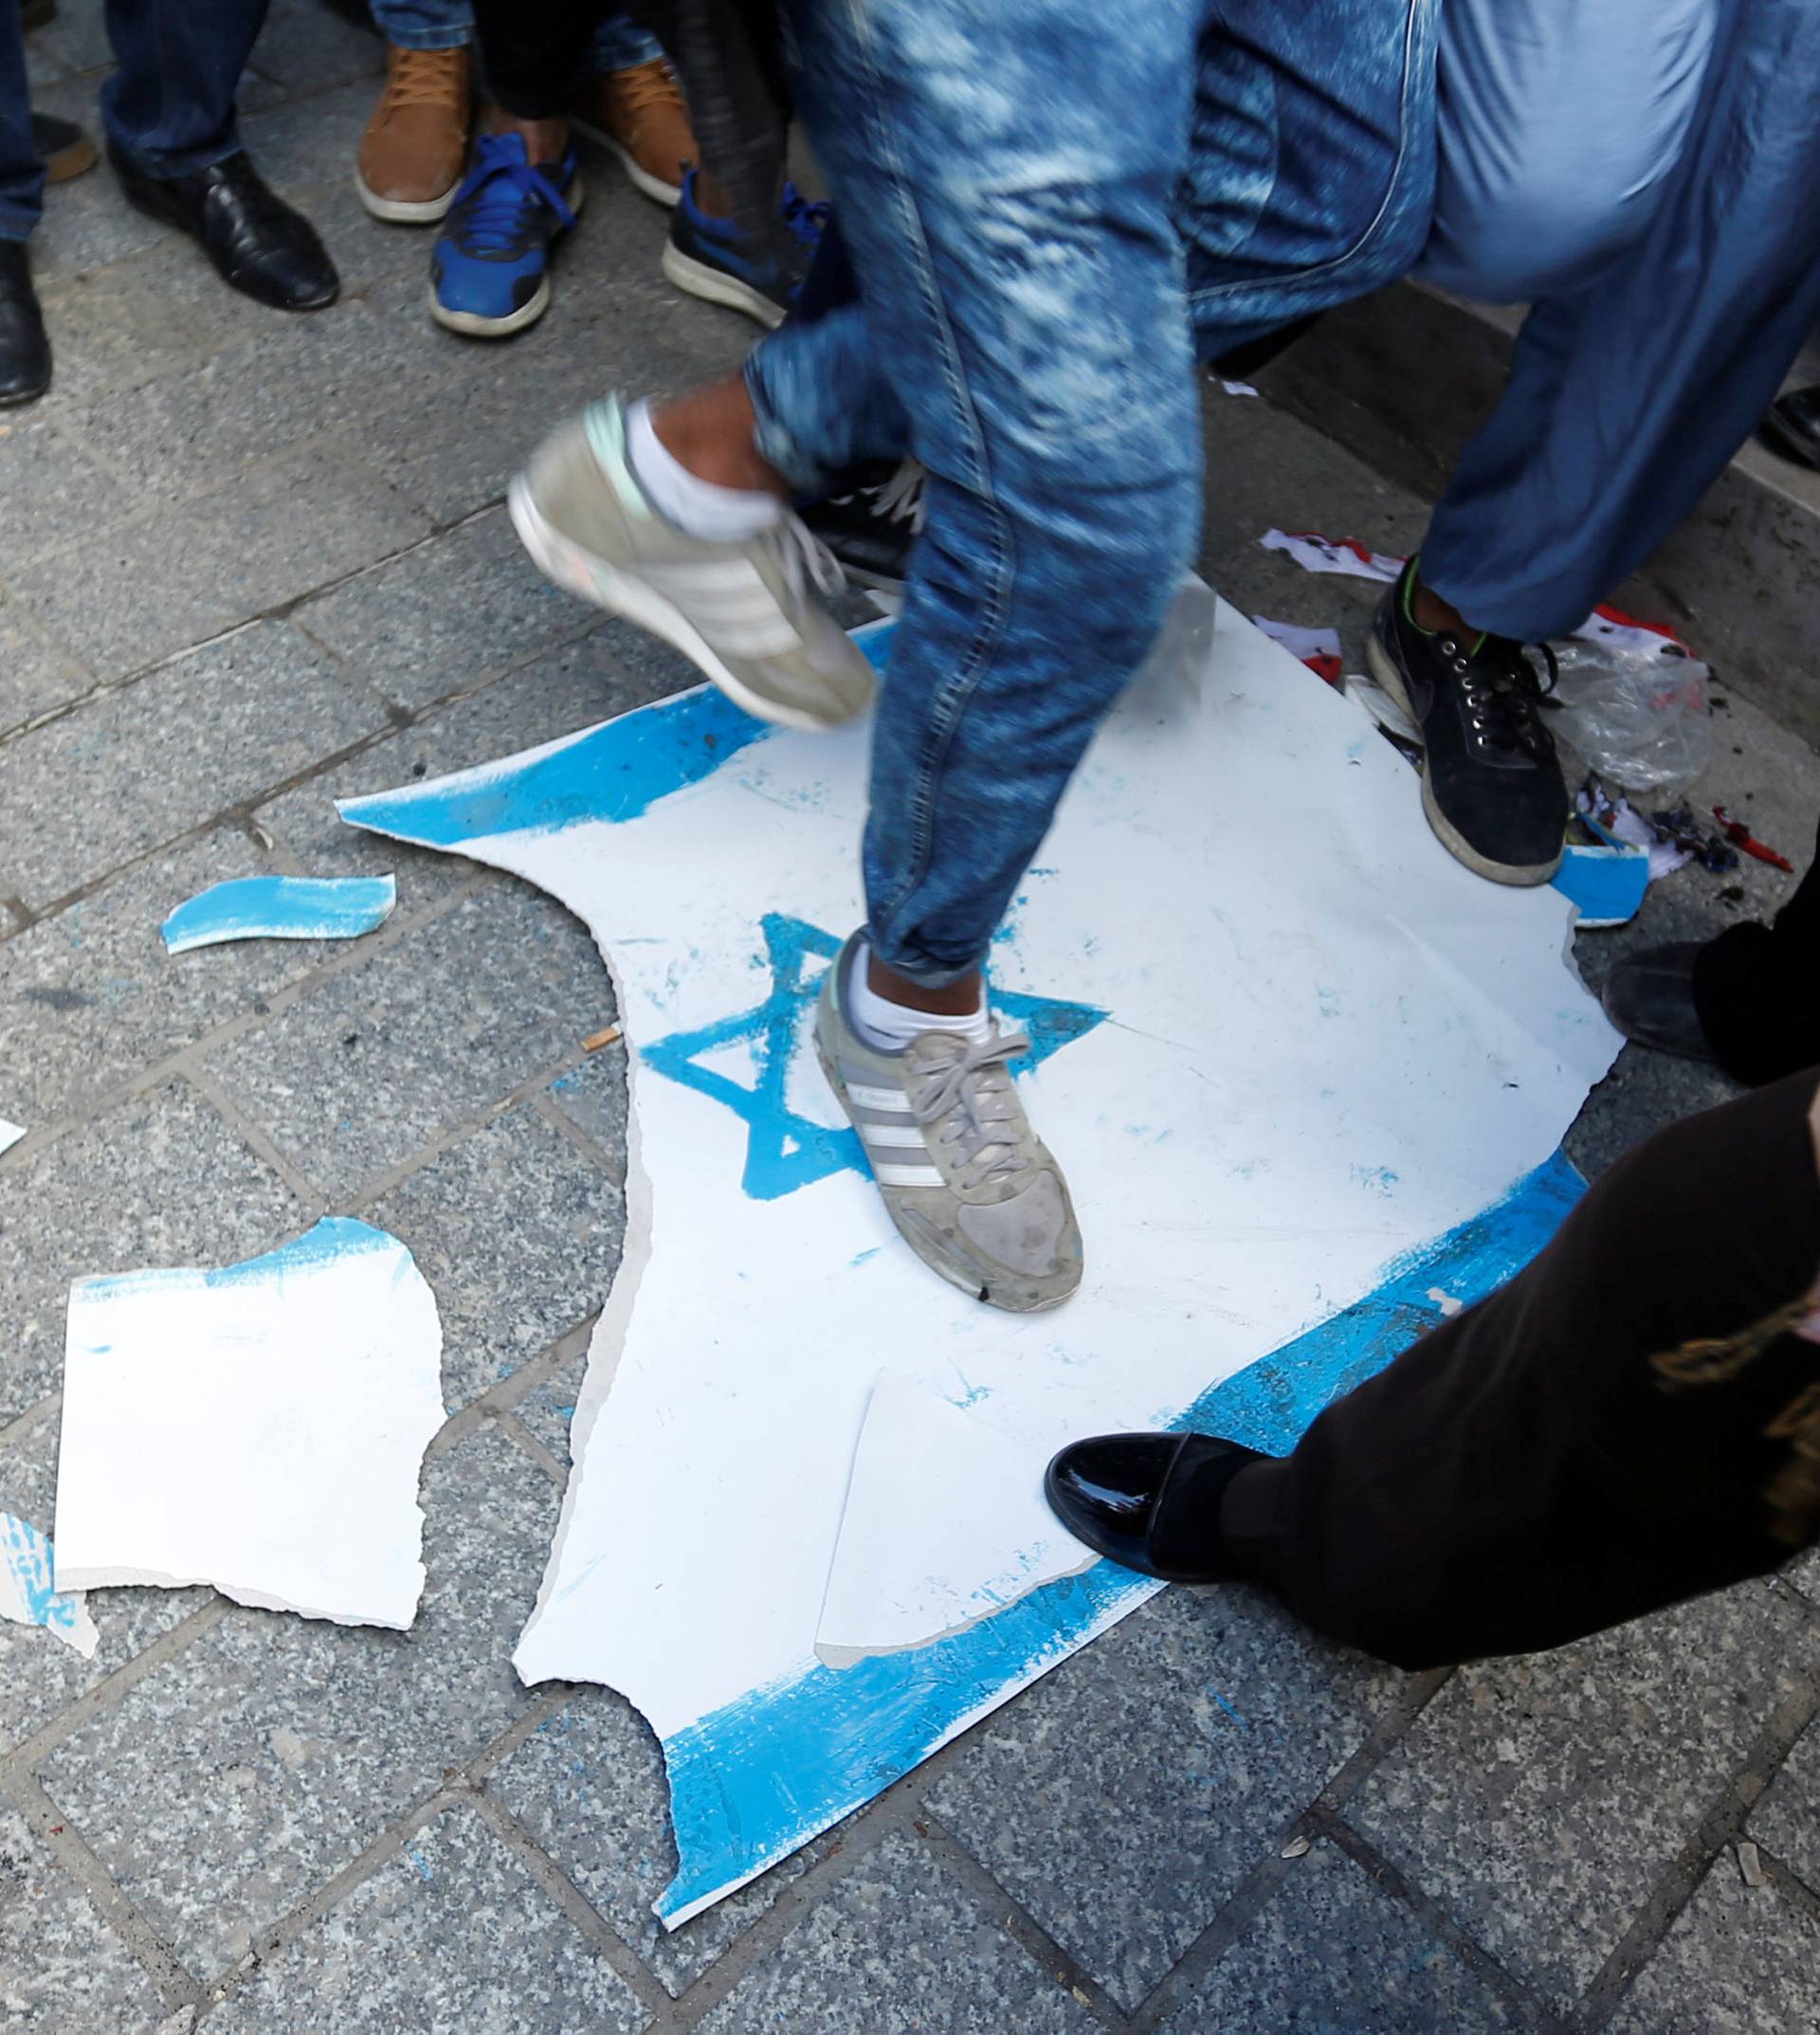 People step on an Israeli flag during a protest against U.S. President Donald Trump's decision to recognise Jerusalem as the capital of Israel, in Tunis